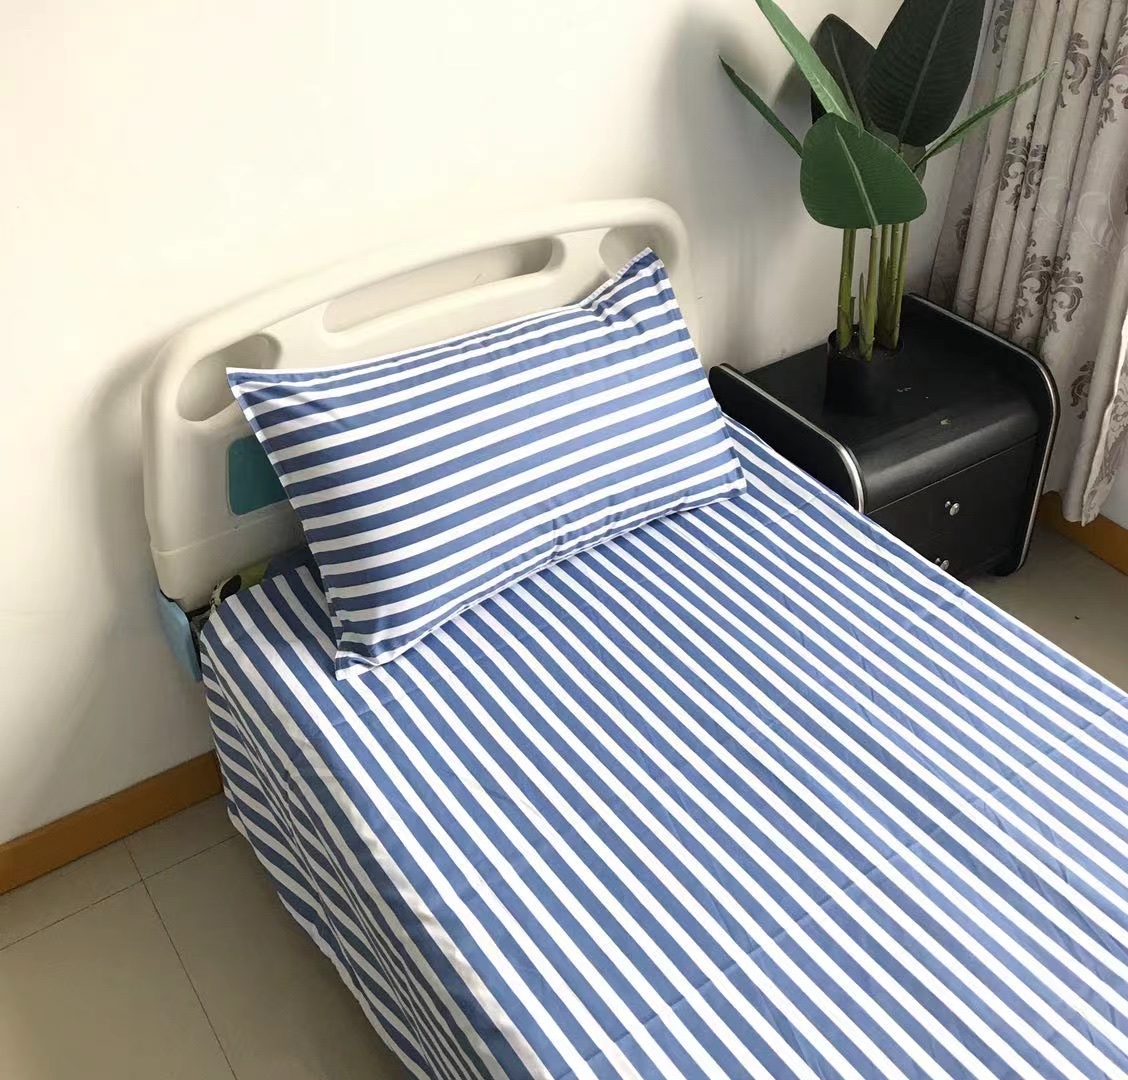 Nicefoto Hotel Supplies Hospital School Epidemic Prevention Bed Sheet Quilt Cover Pillowcase Striped Plain